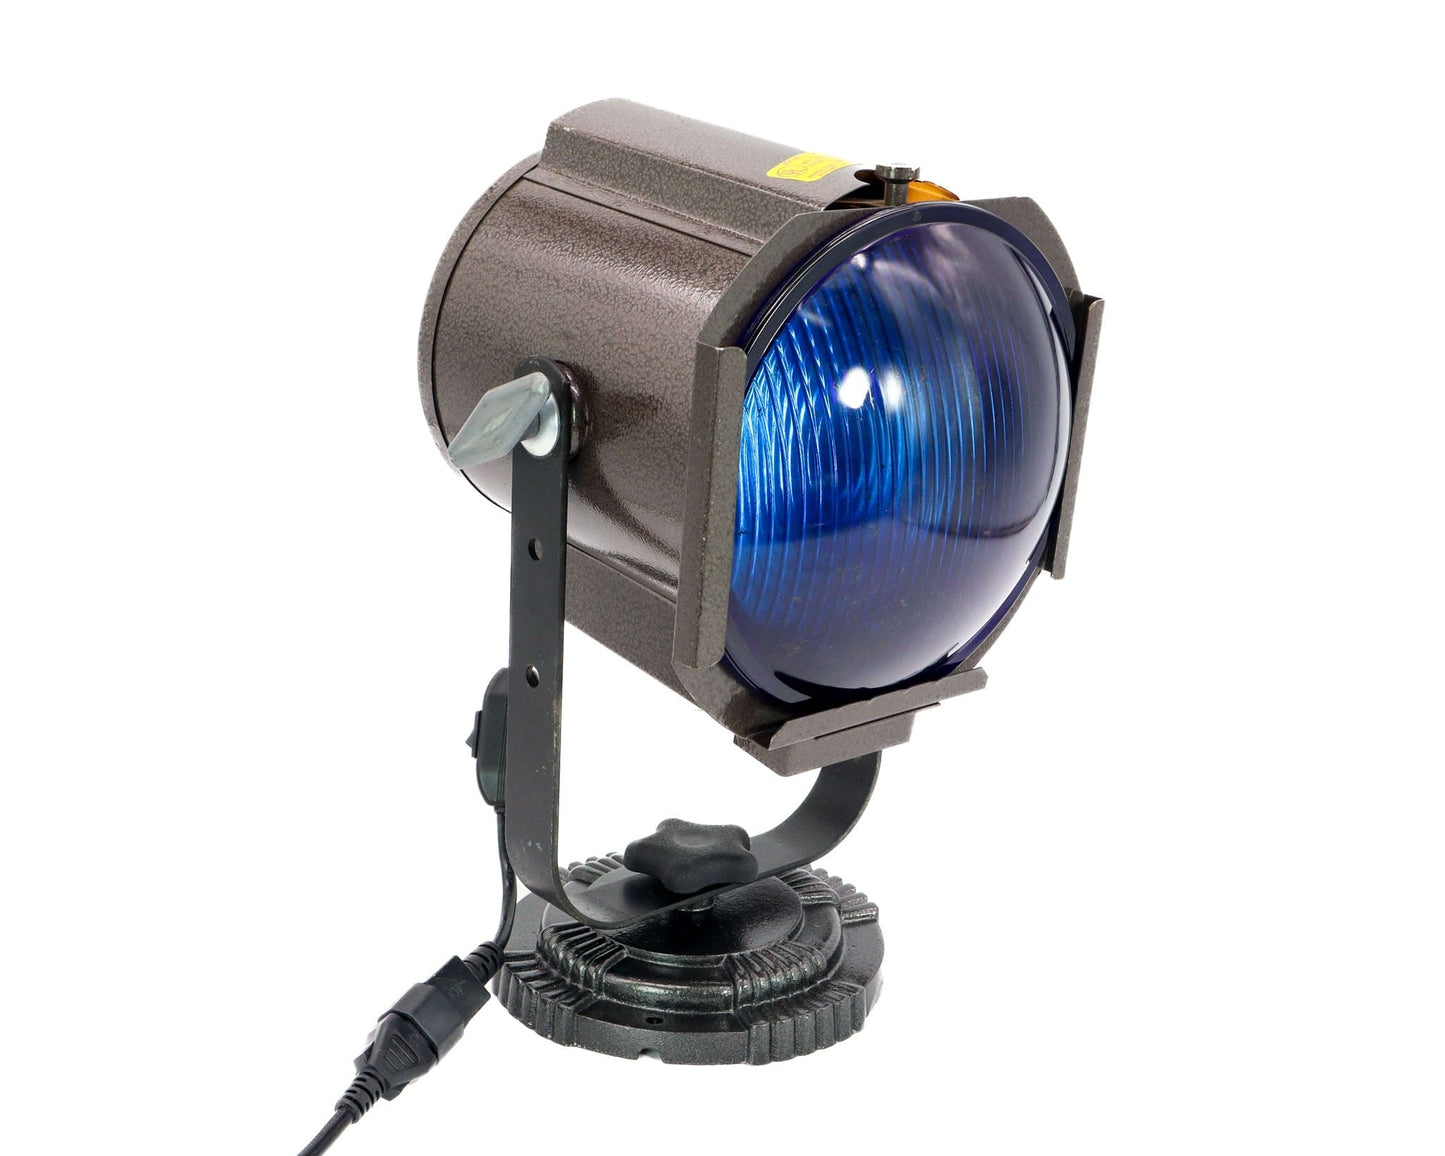 LightAndTimeArt Flood & Spot Lights Small, Gray Stage light with Colored Lenses, Home Theater & Movie Room Decor